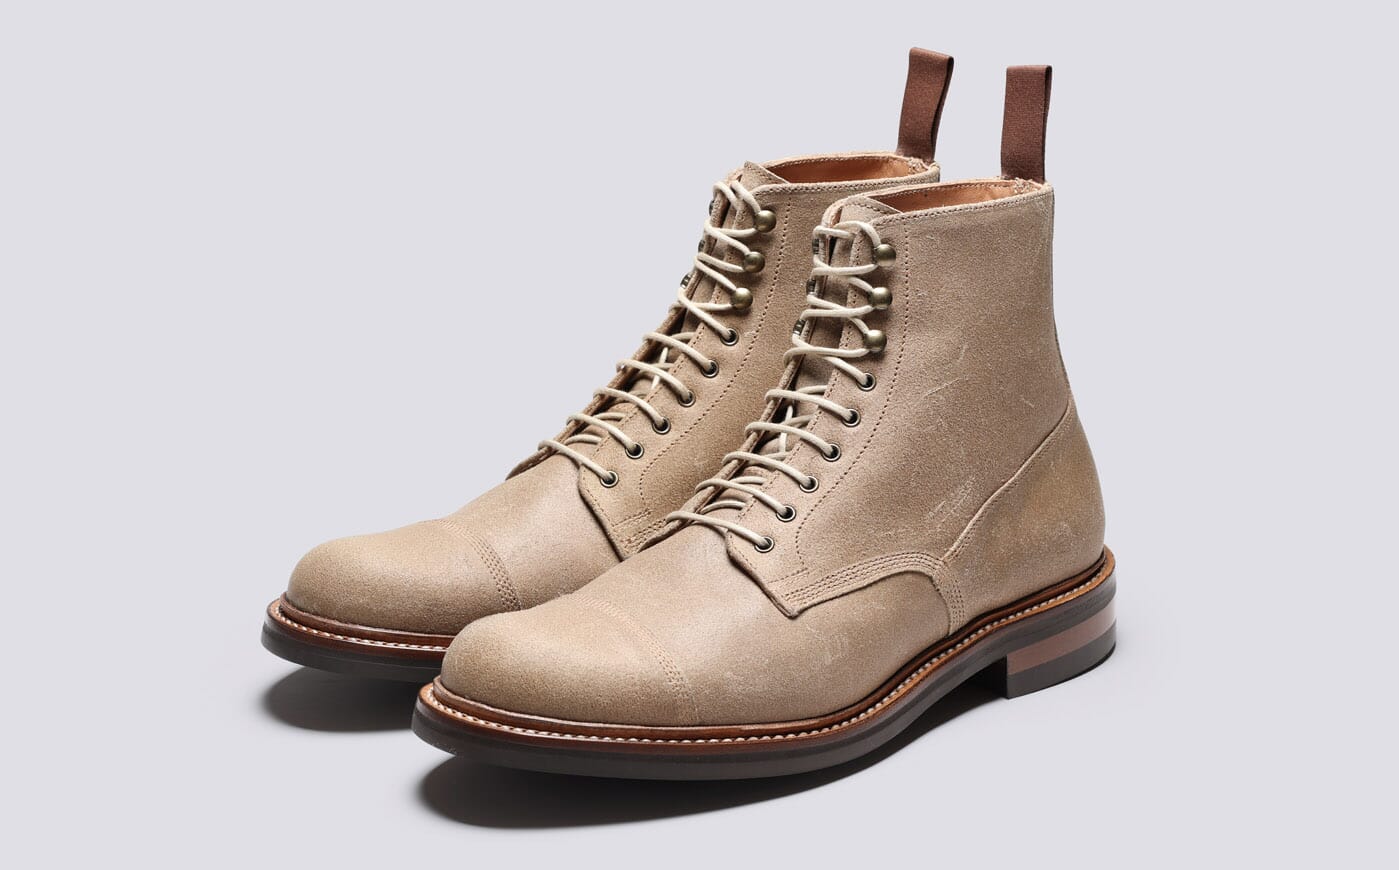 Randall | Mens Derby Boots in Taupe Suede | Grenson